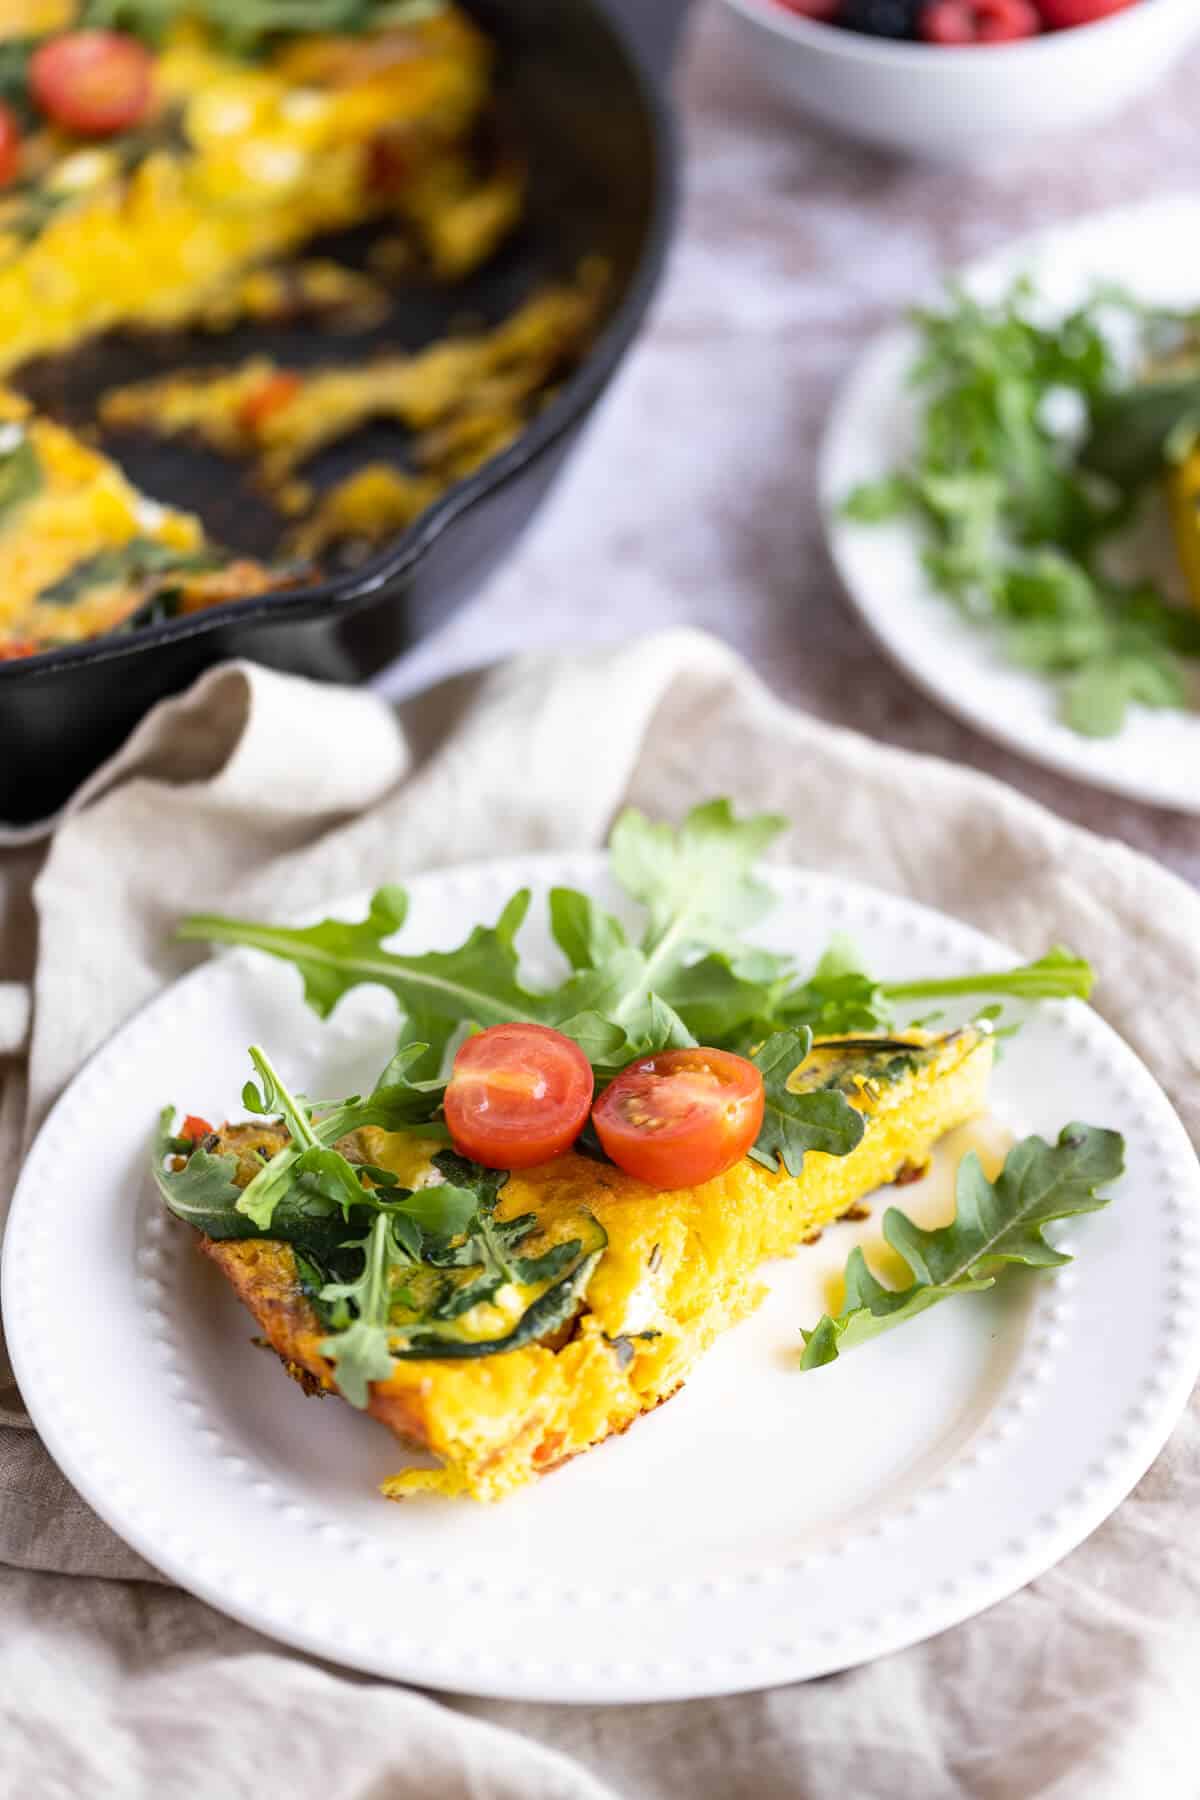 slice of a frittata on a white plate garnished with arugula